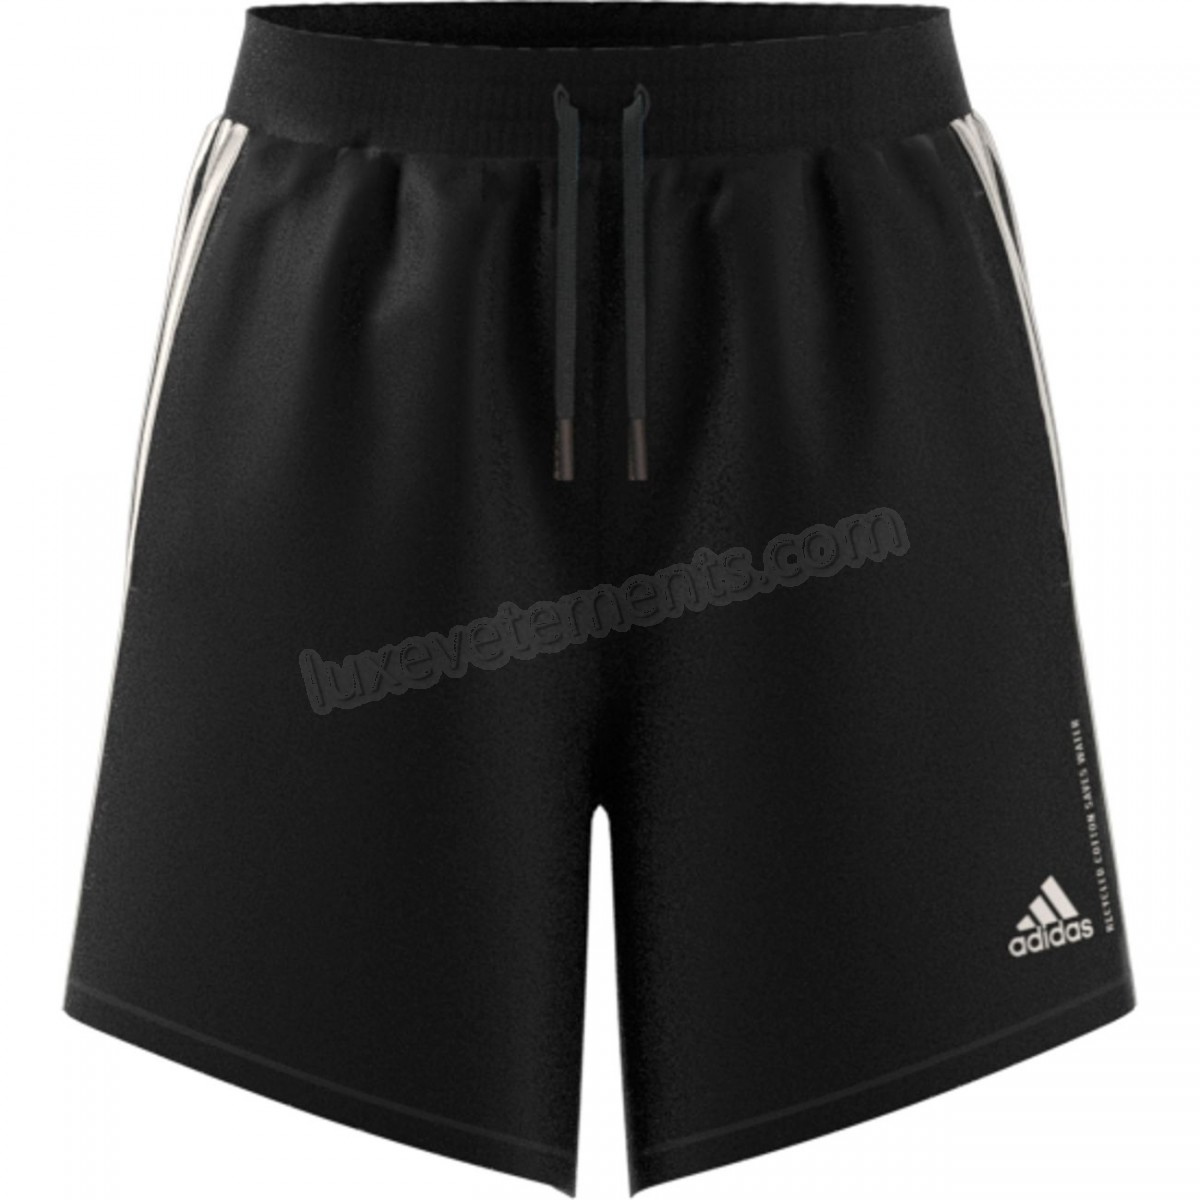 Adidas-Fitness femme ADIDAS Short femme adidas Must Haves Recycled Cotton Vente en ligne - -4